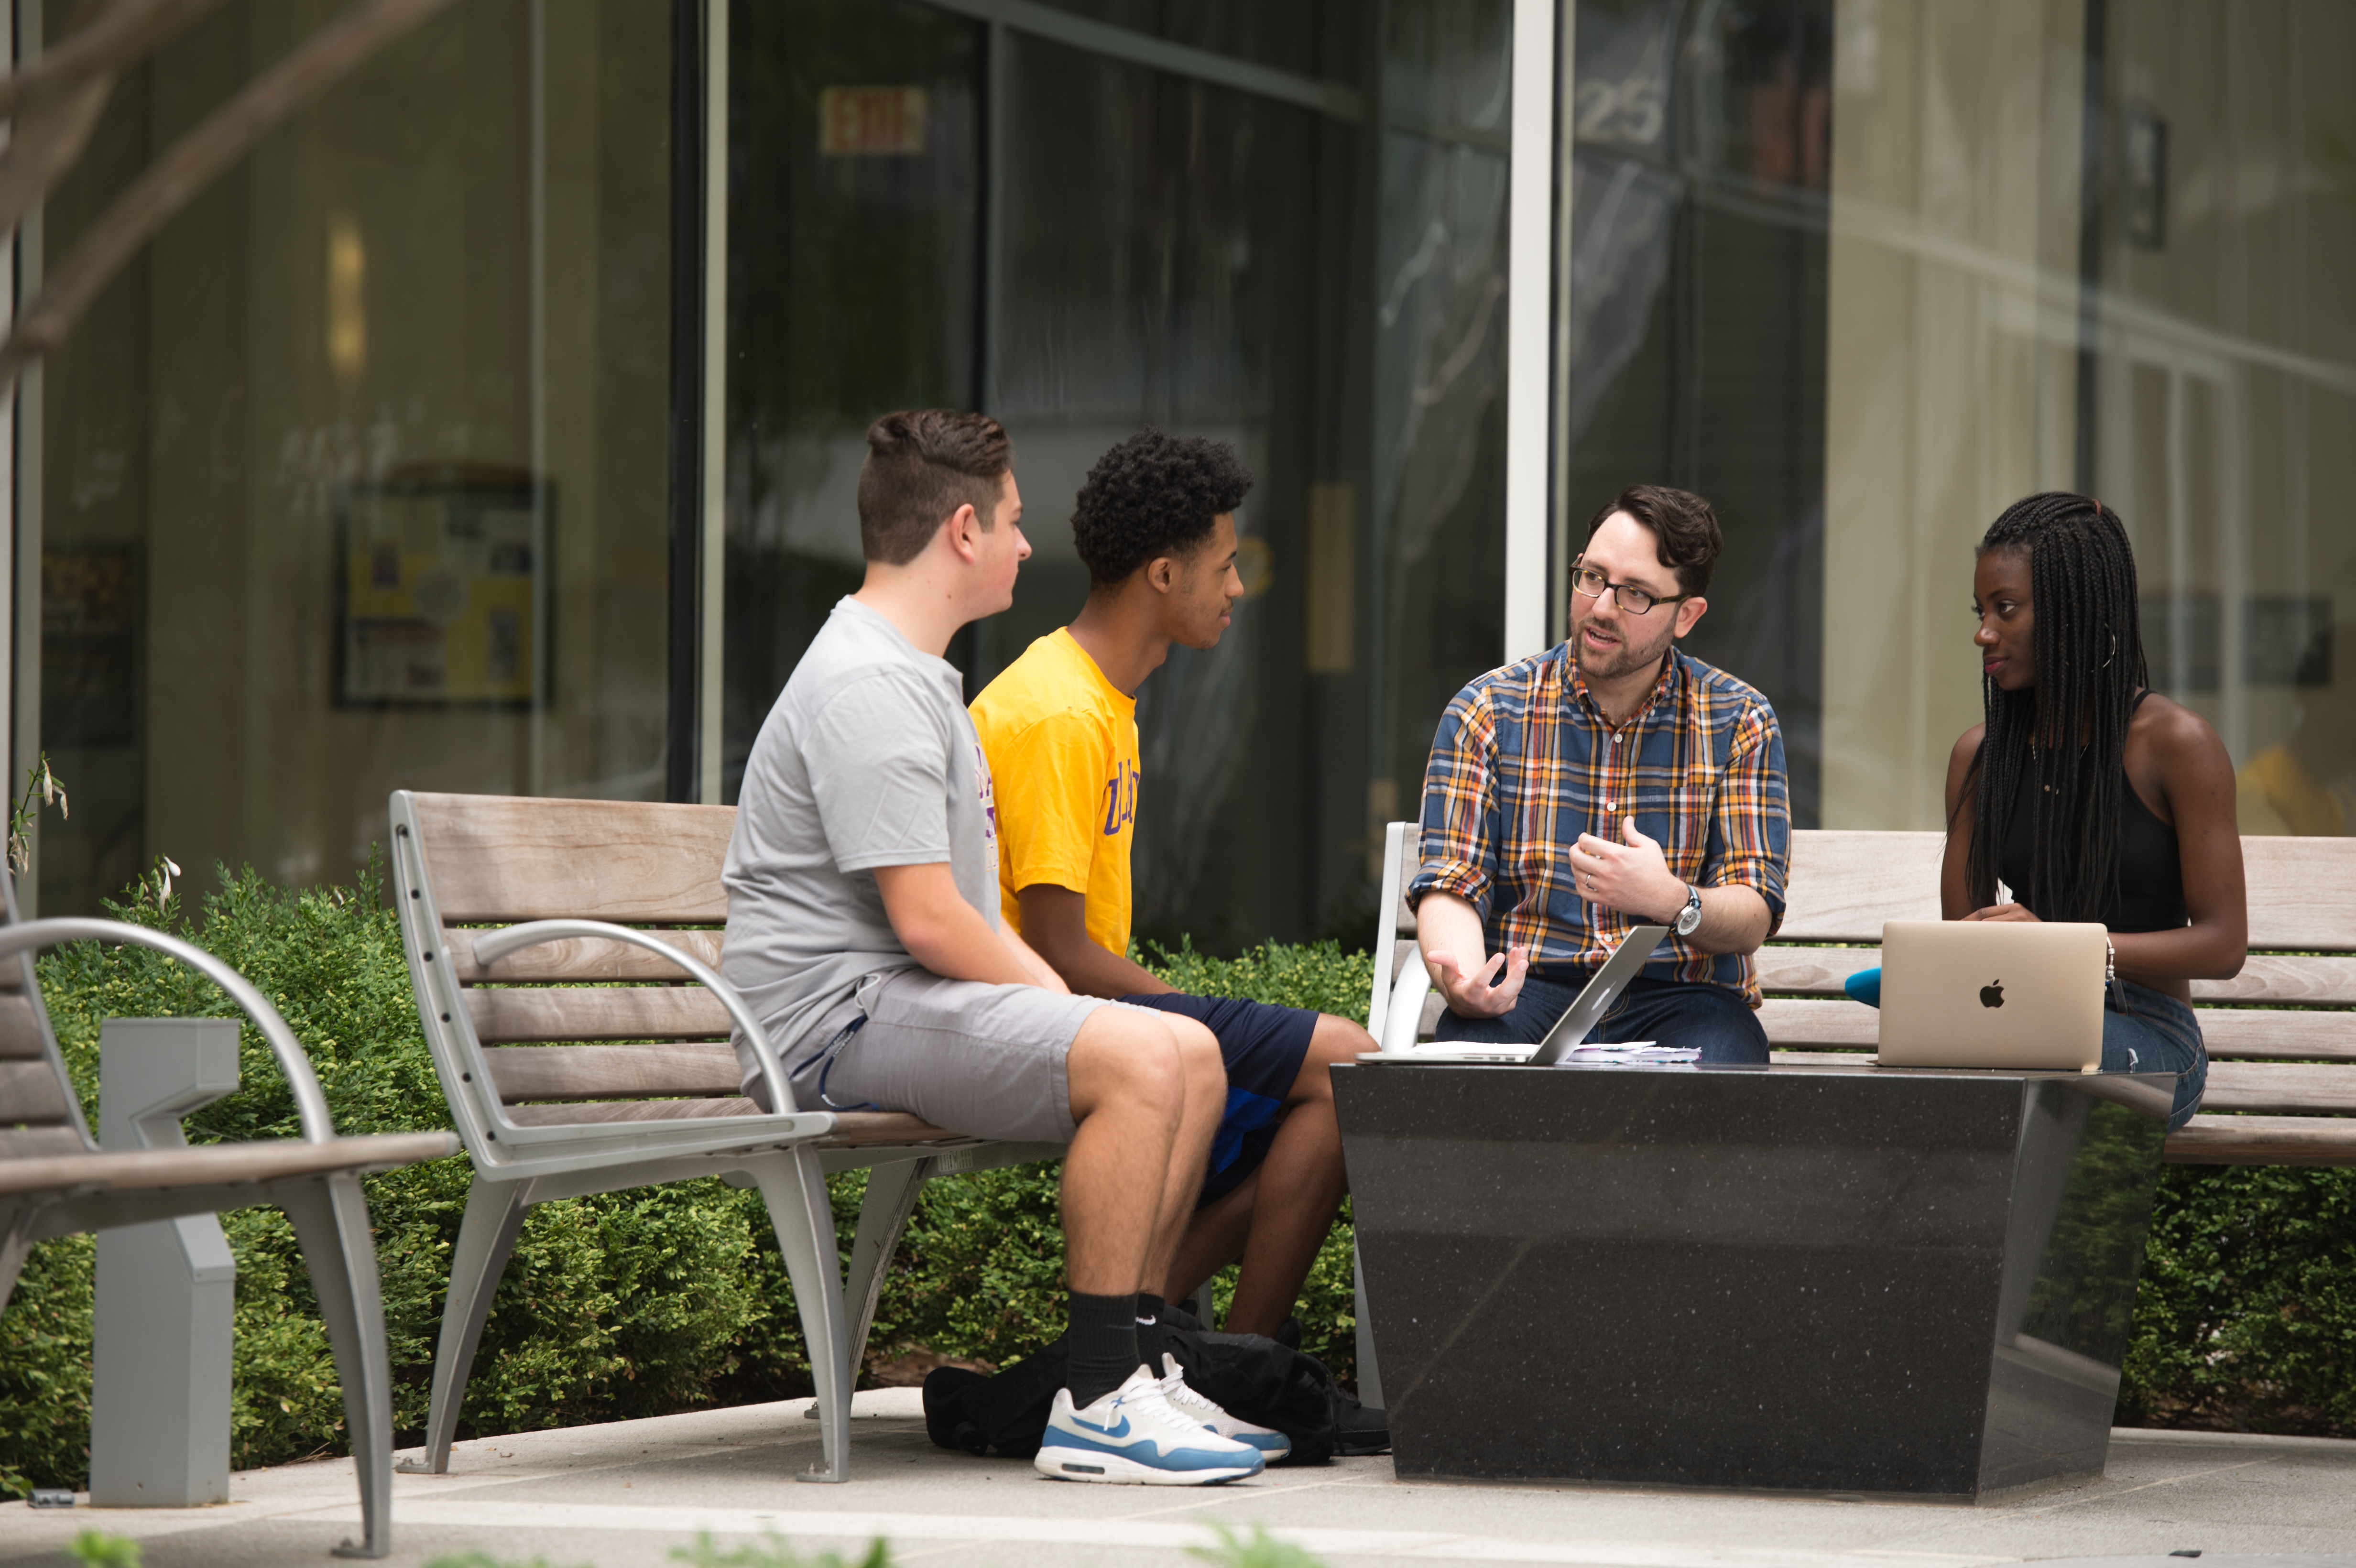 Faculty instructing students in outdoor campus area